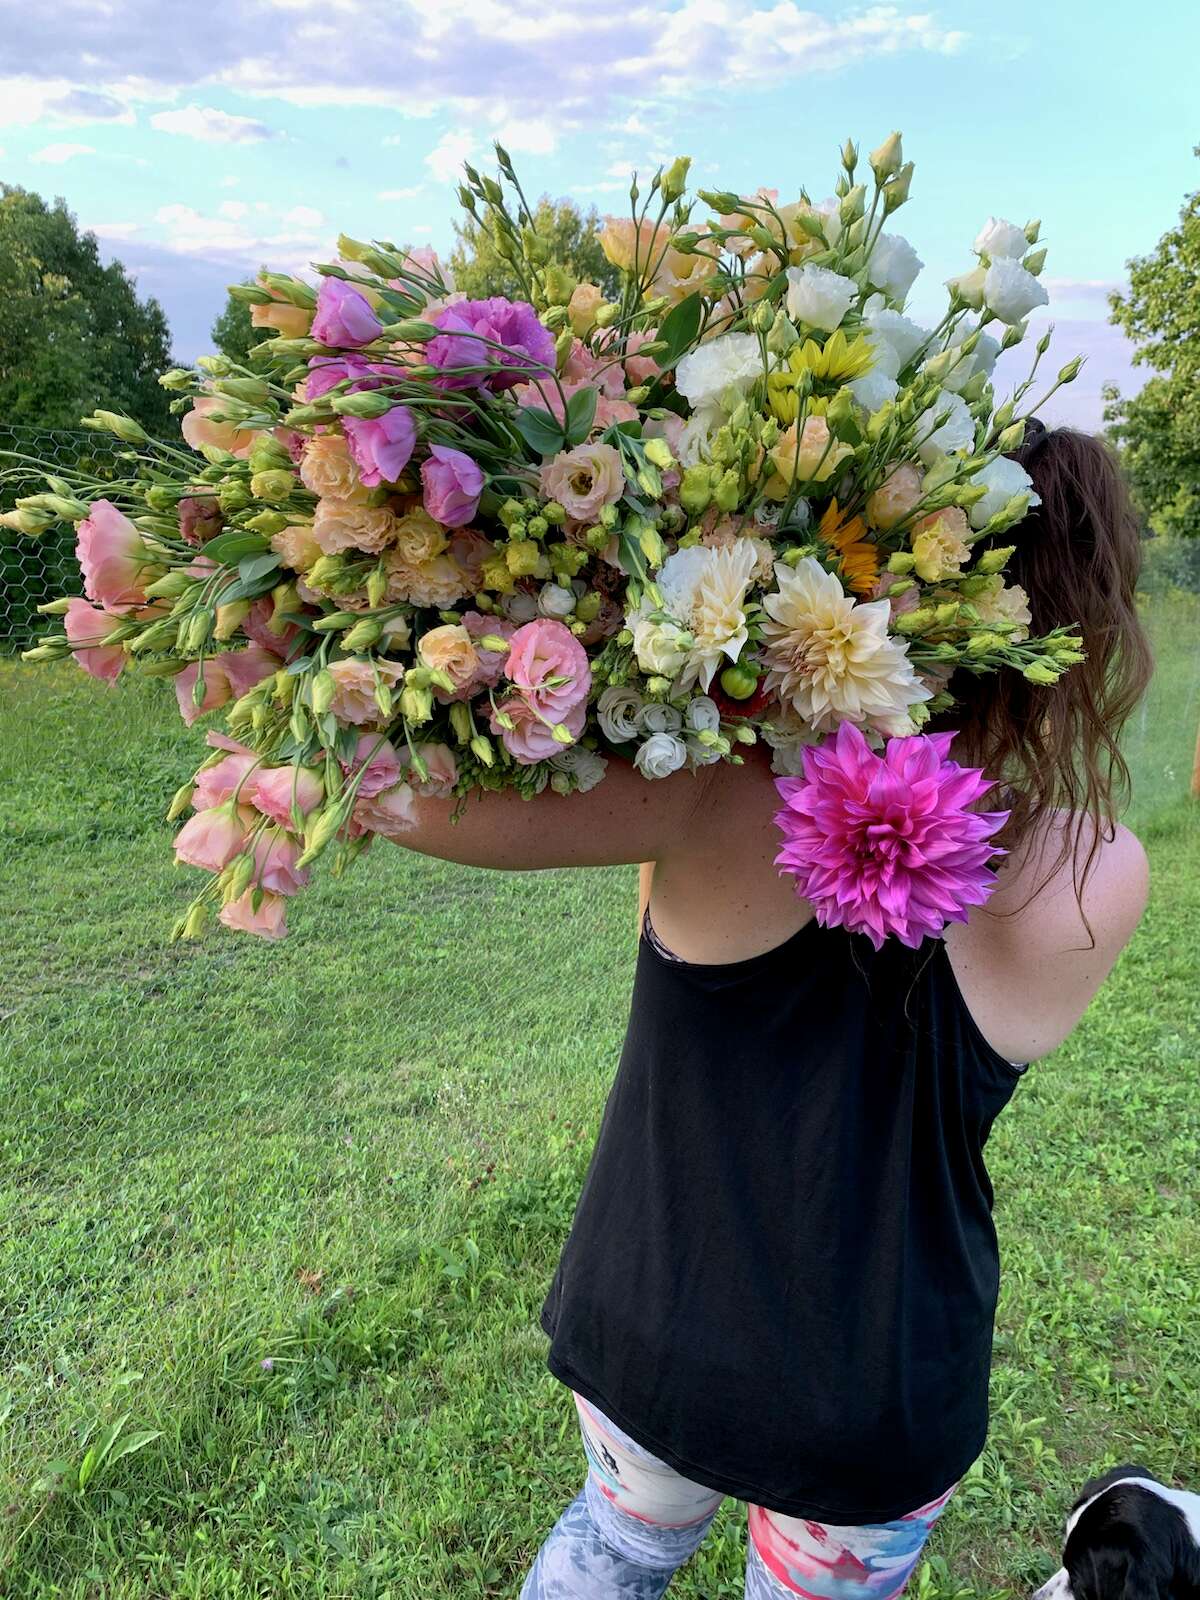 Taylor Ten Eyck harvests flowers for floral arrangements as part of her duties with Twin Dahlias.